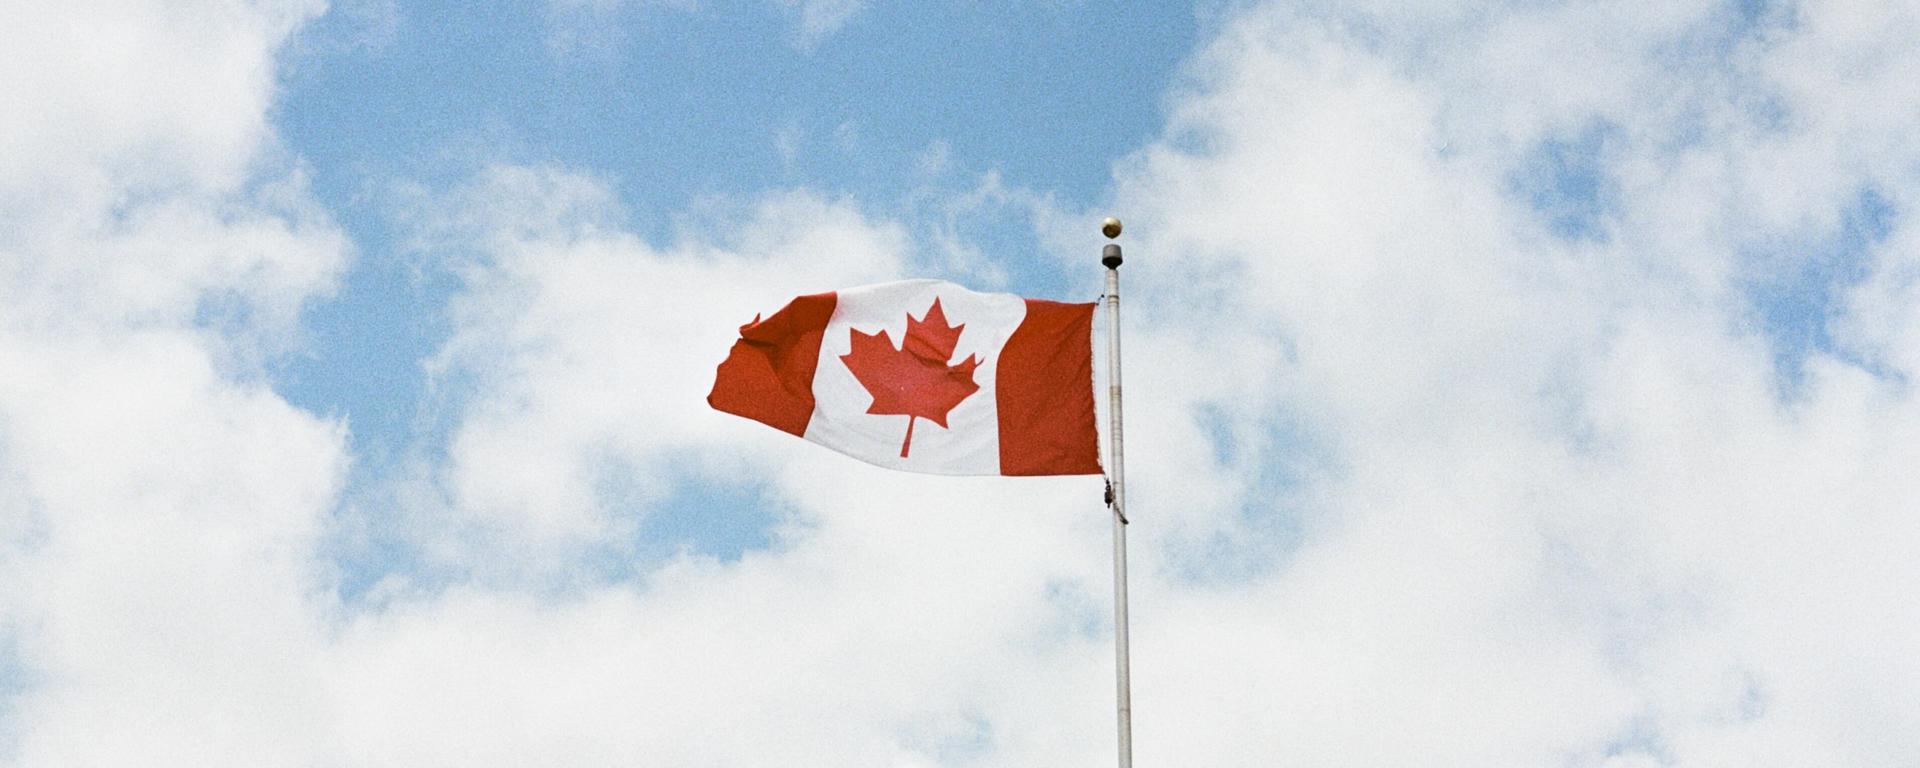 A Canadian flag flies proudly against a partly-cloudy sky